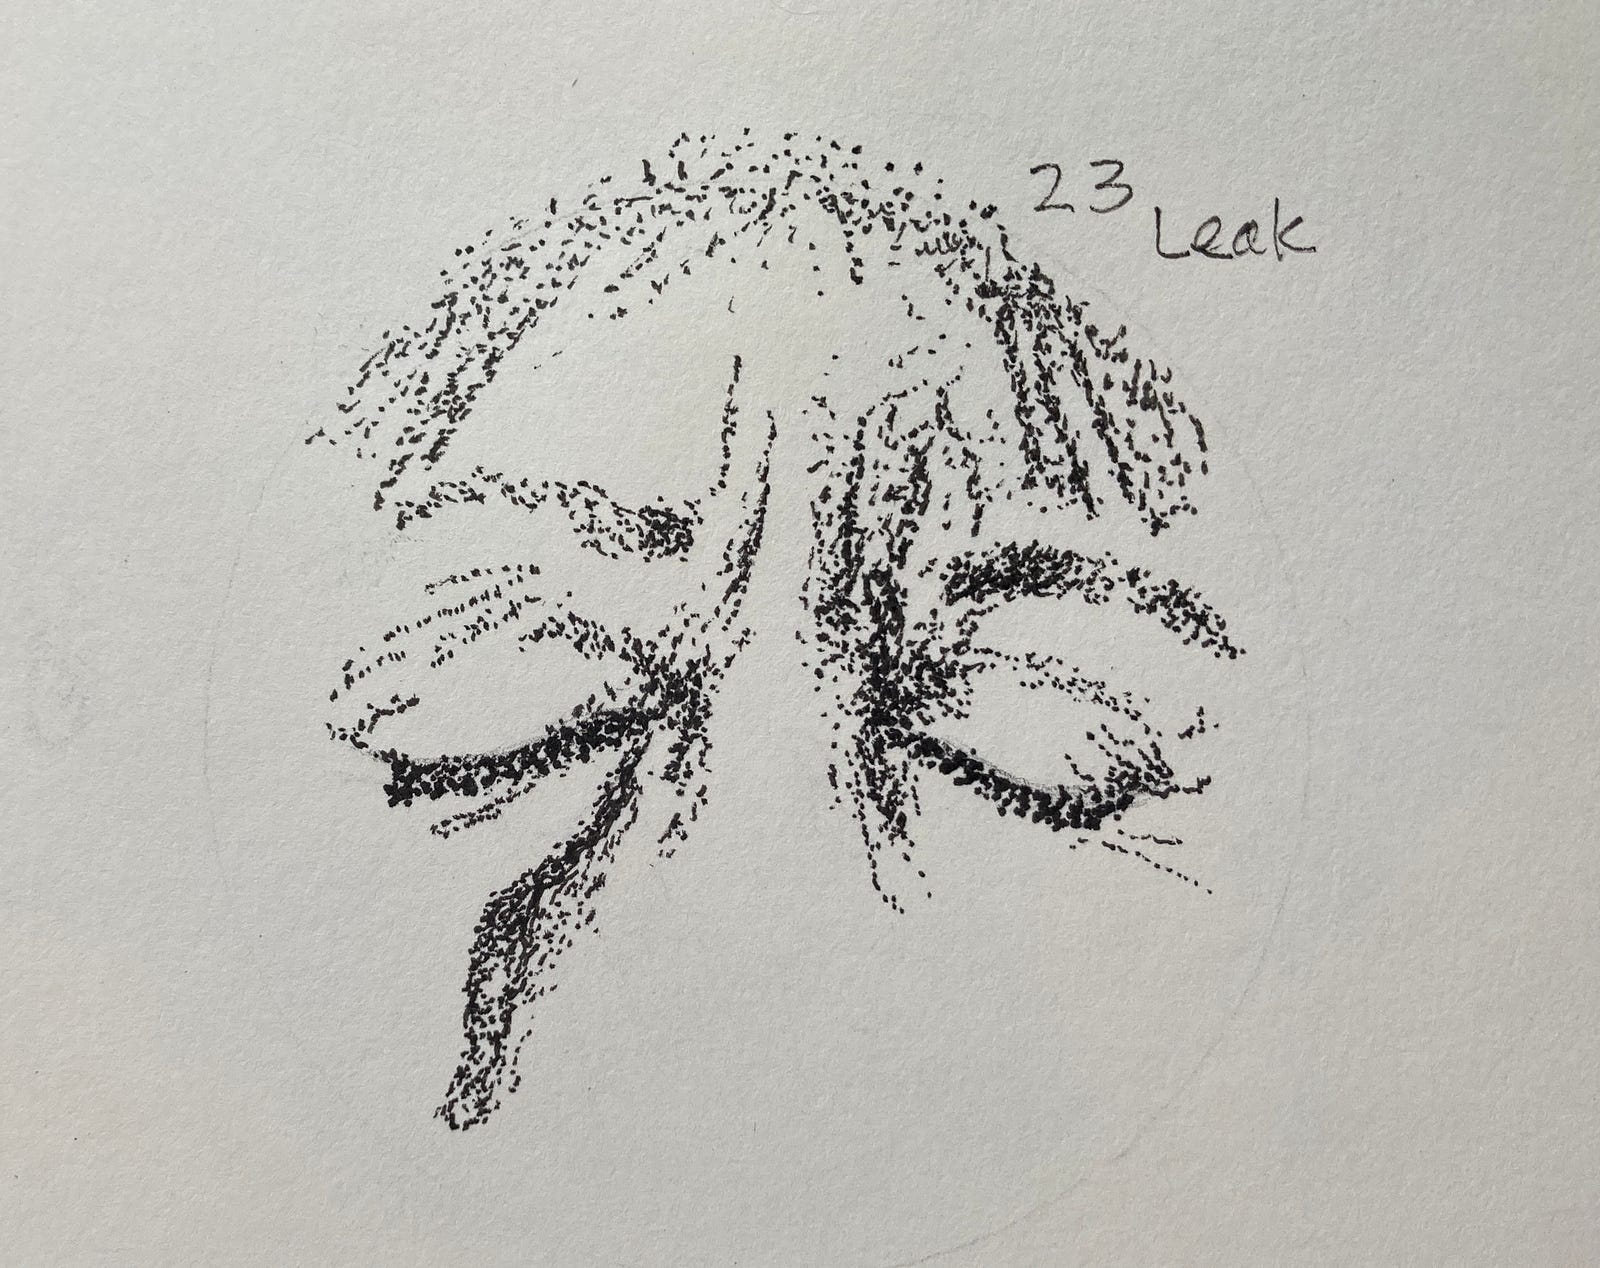 Tear leaking from right eye. Inktober prompt